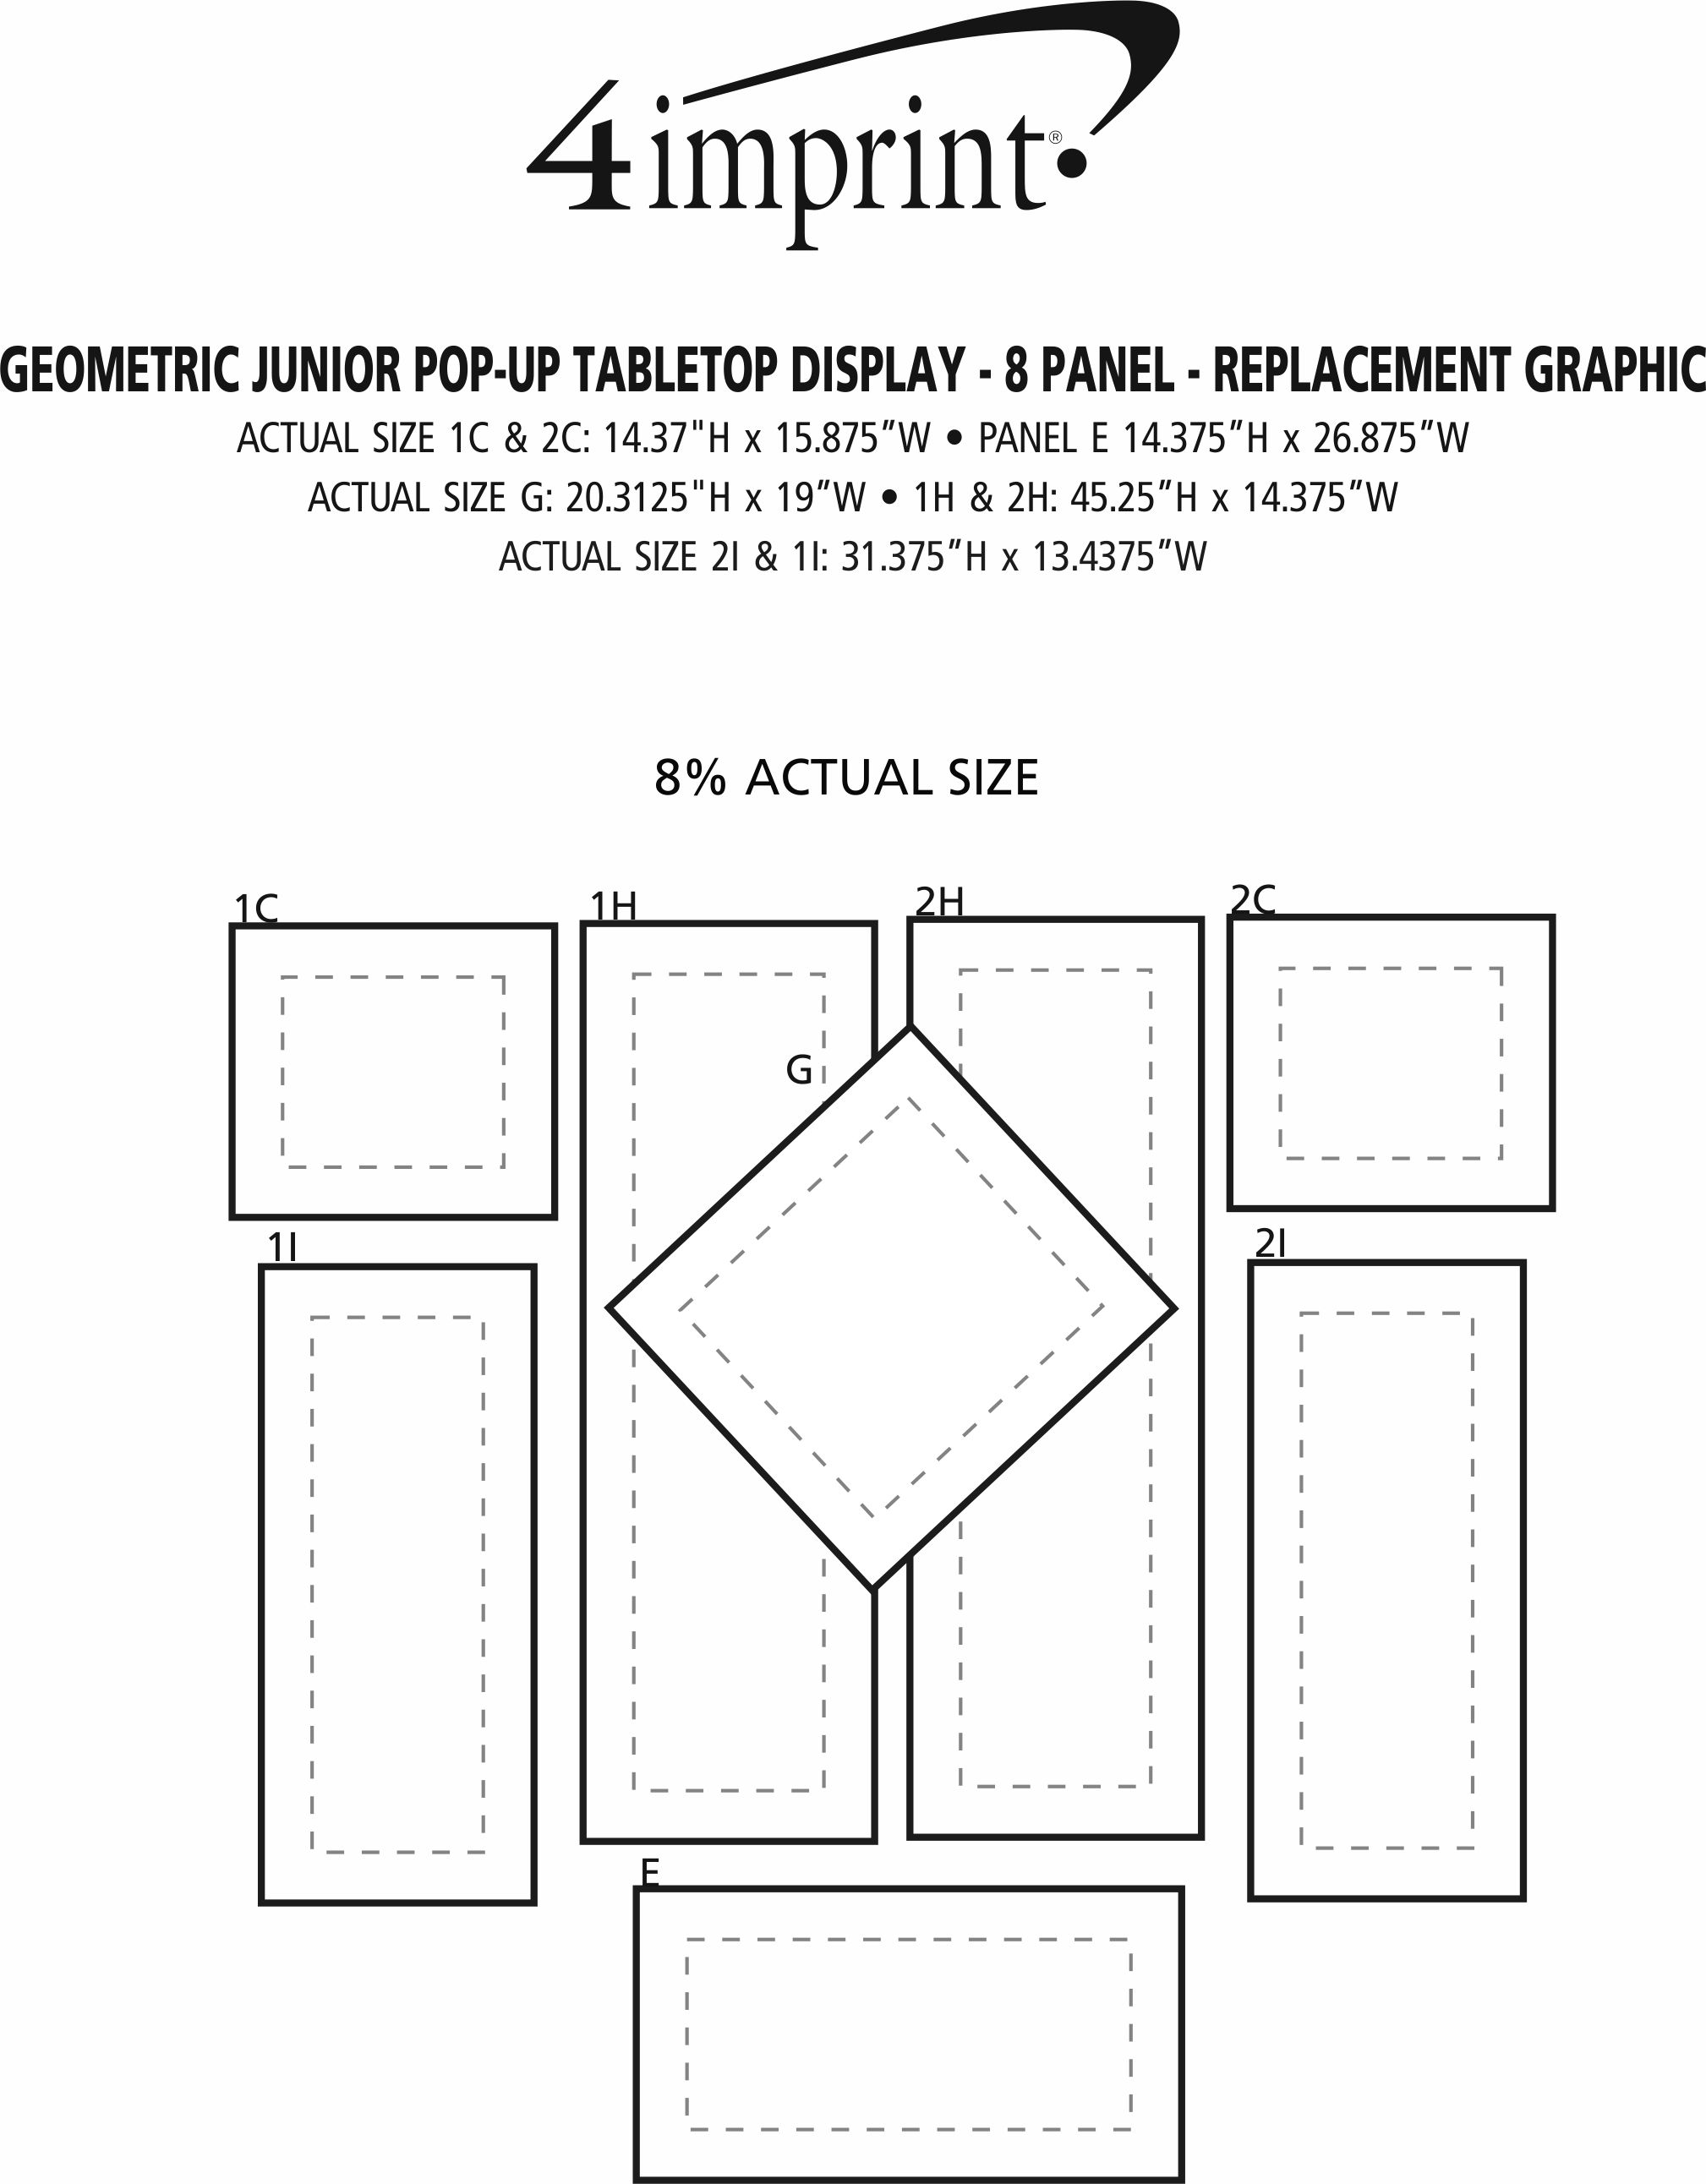 Imprint Area of Geometric Junior Pop-Up Tabletop Display - 8 Panel - Replacement Graphic